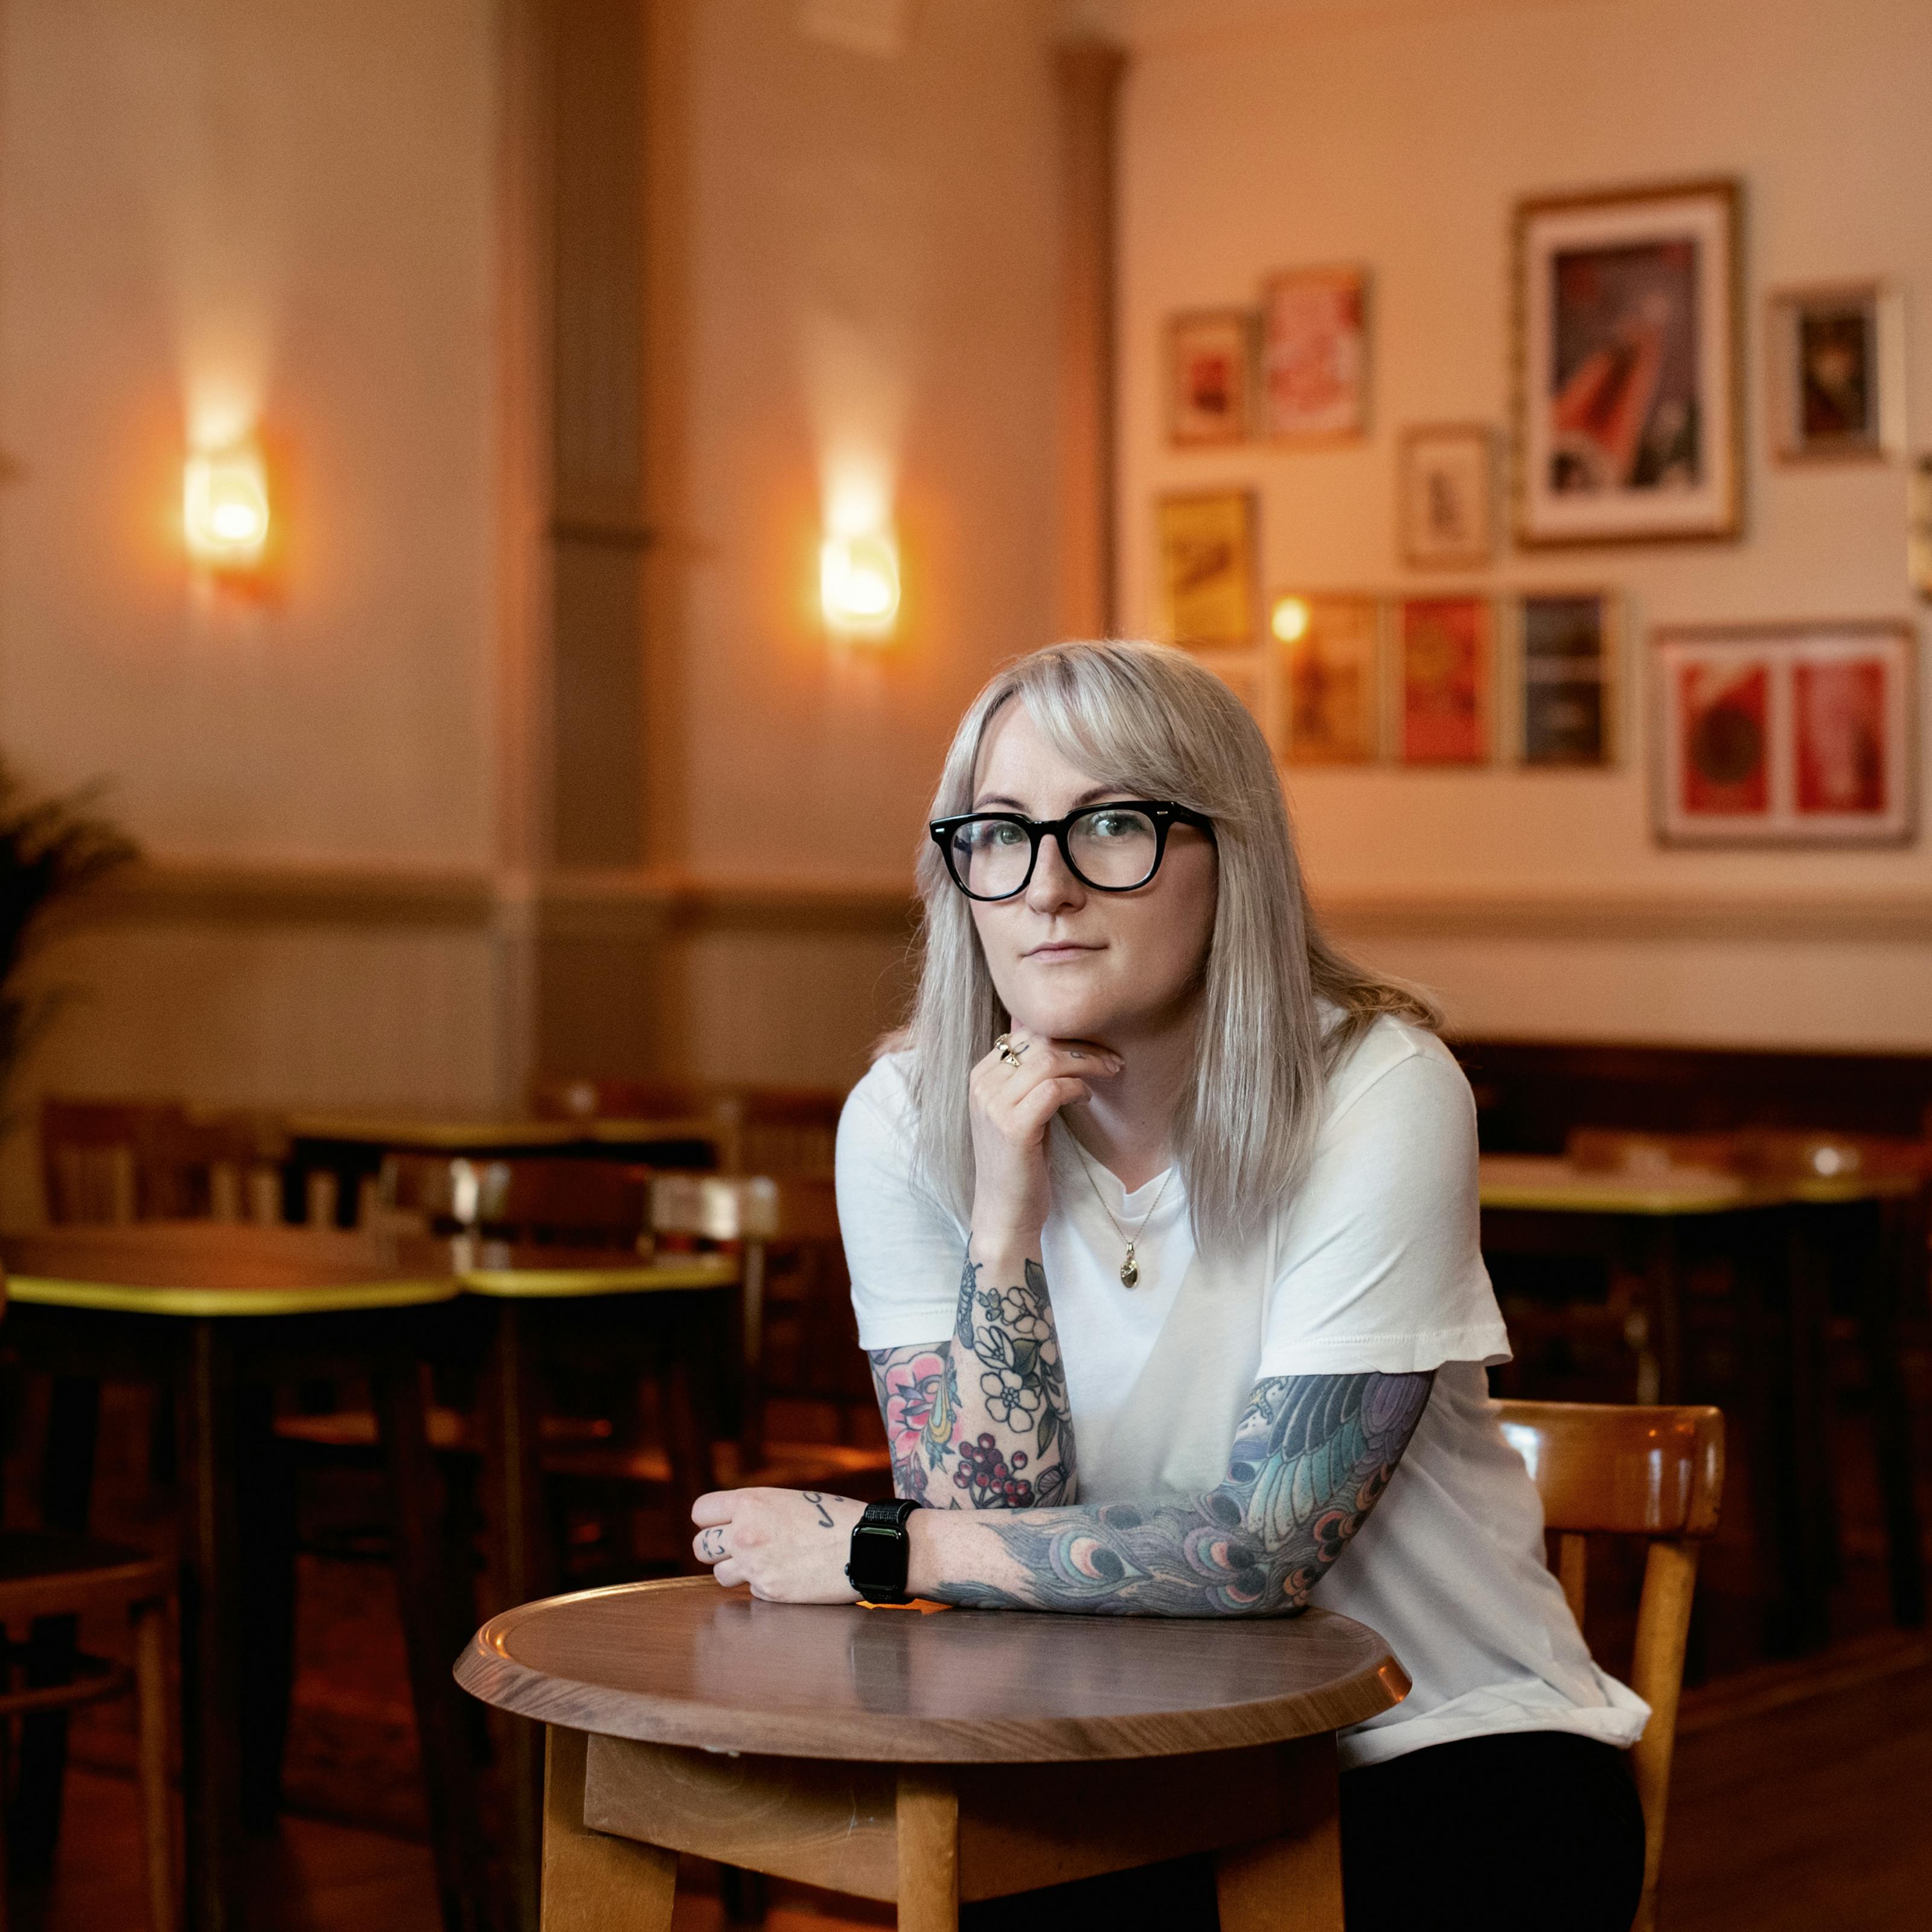 Photograph of a young woman with shoulder length blond hair seated indoors in a pub environment at a small circular wooden table. She is leaning forwards, one arm flat on the table, the other resting on its elbow, her hand tucked under her chin. She is wearing glasses looking at the camera, in a white t-shirt. Both her arms are adorned with tattoos. Behind her in the background are other empty tables in the pub and walls covered in framed pictures and a couple of wall lights.